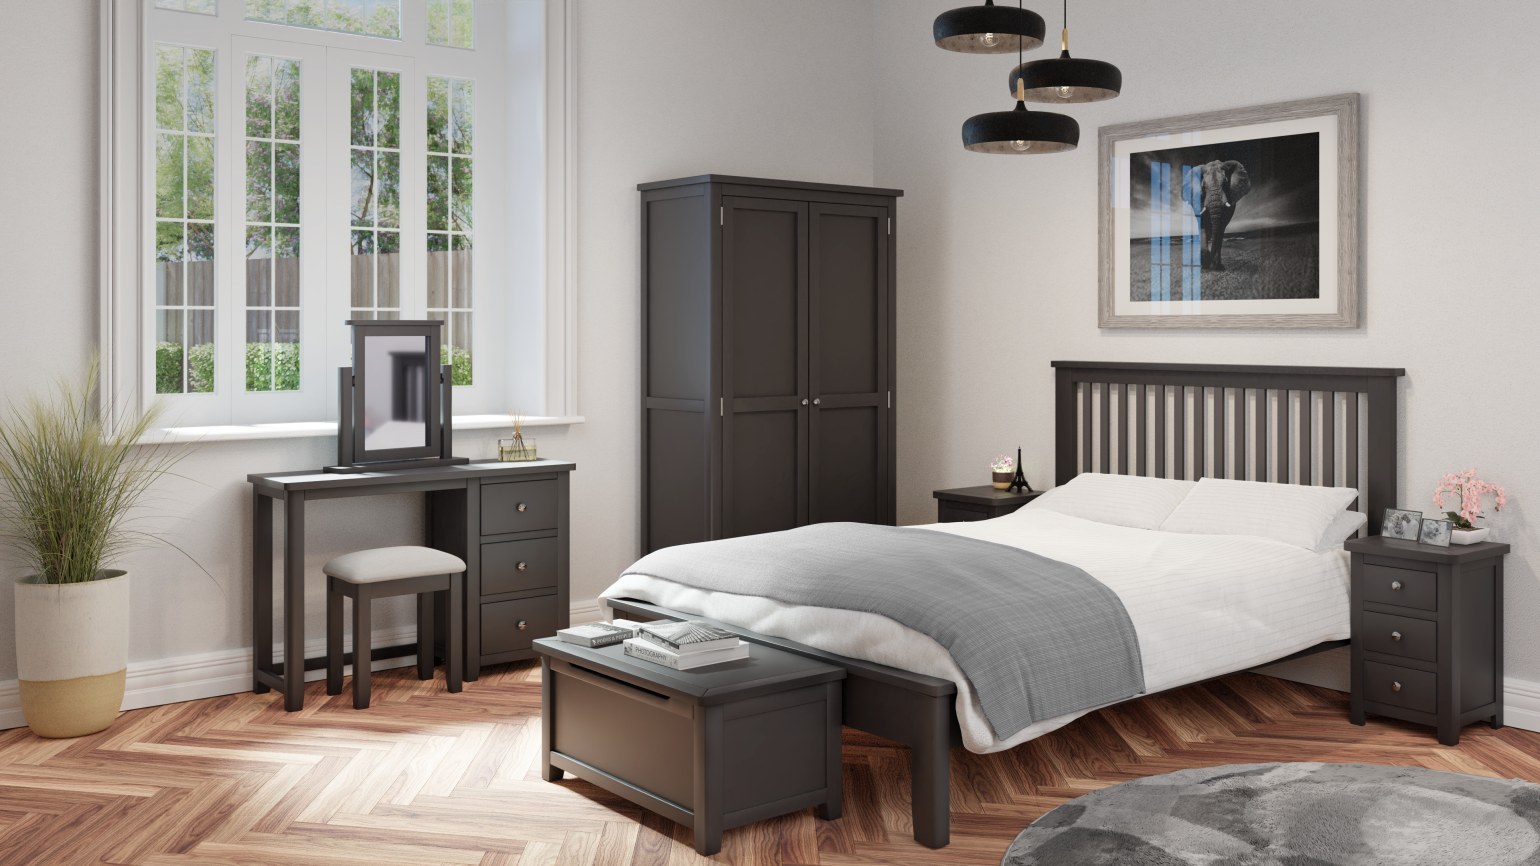 Shop all of our Beds, Mattresses & Bedroom Furniture